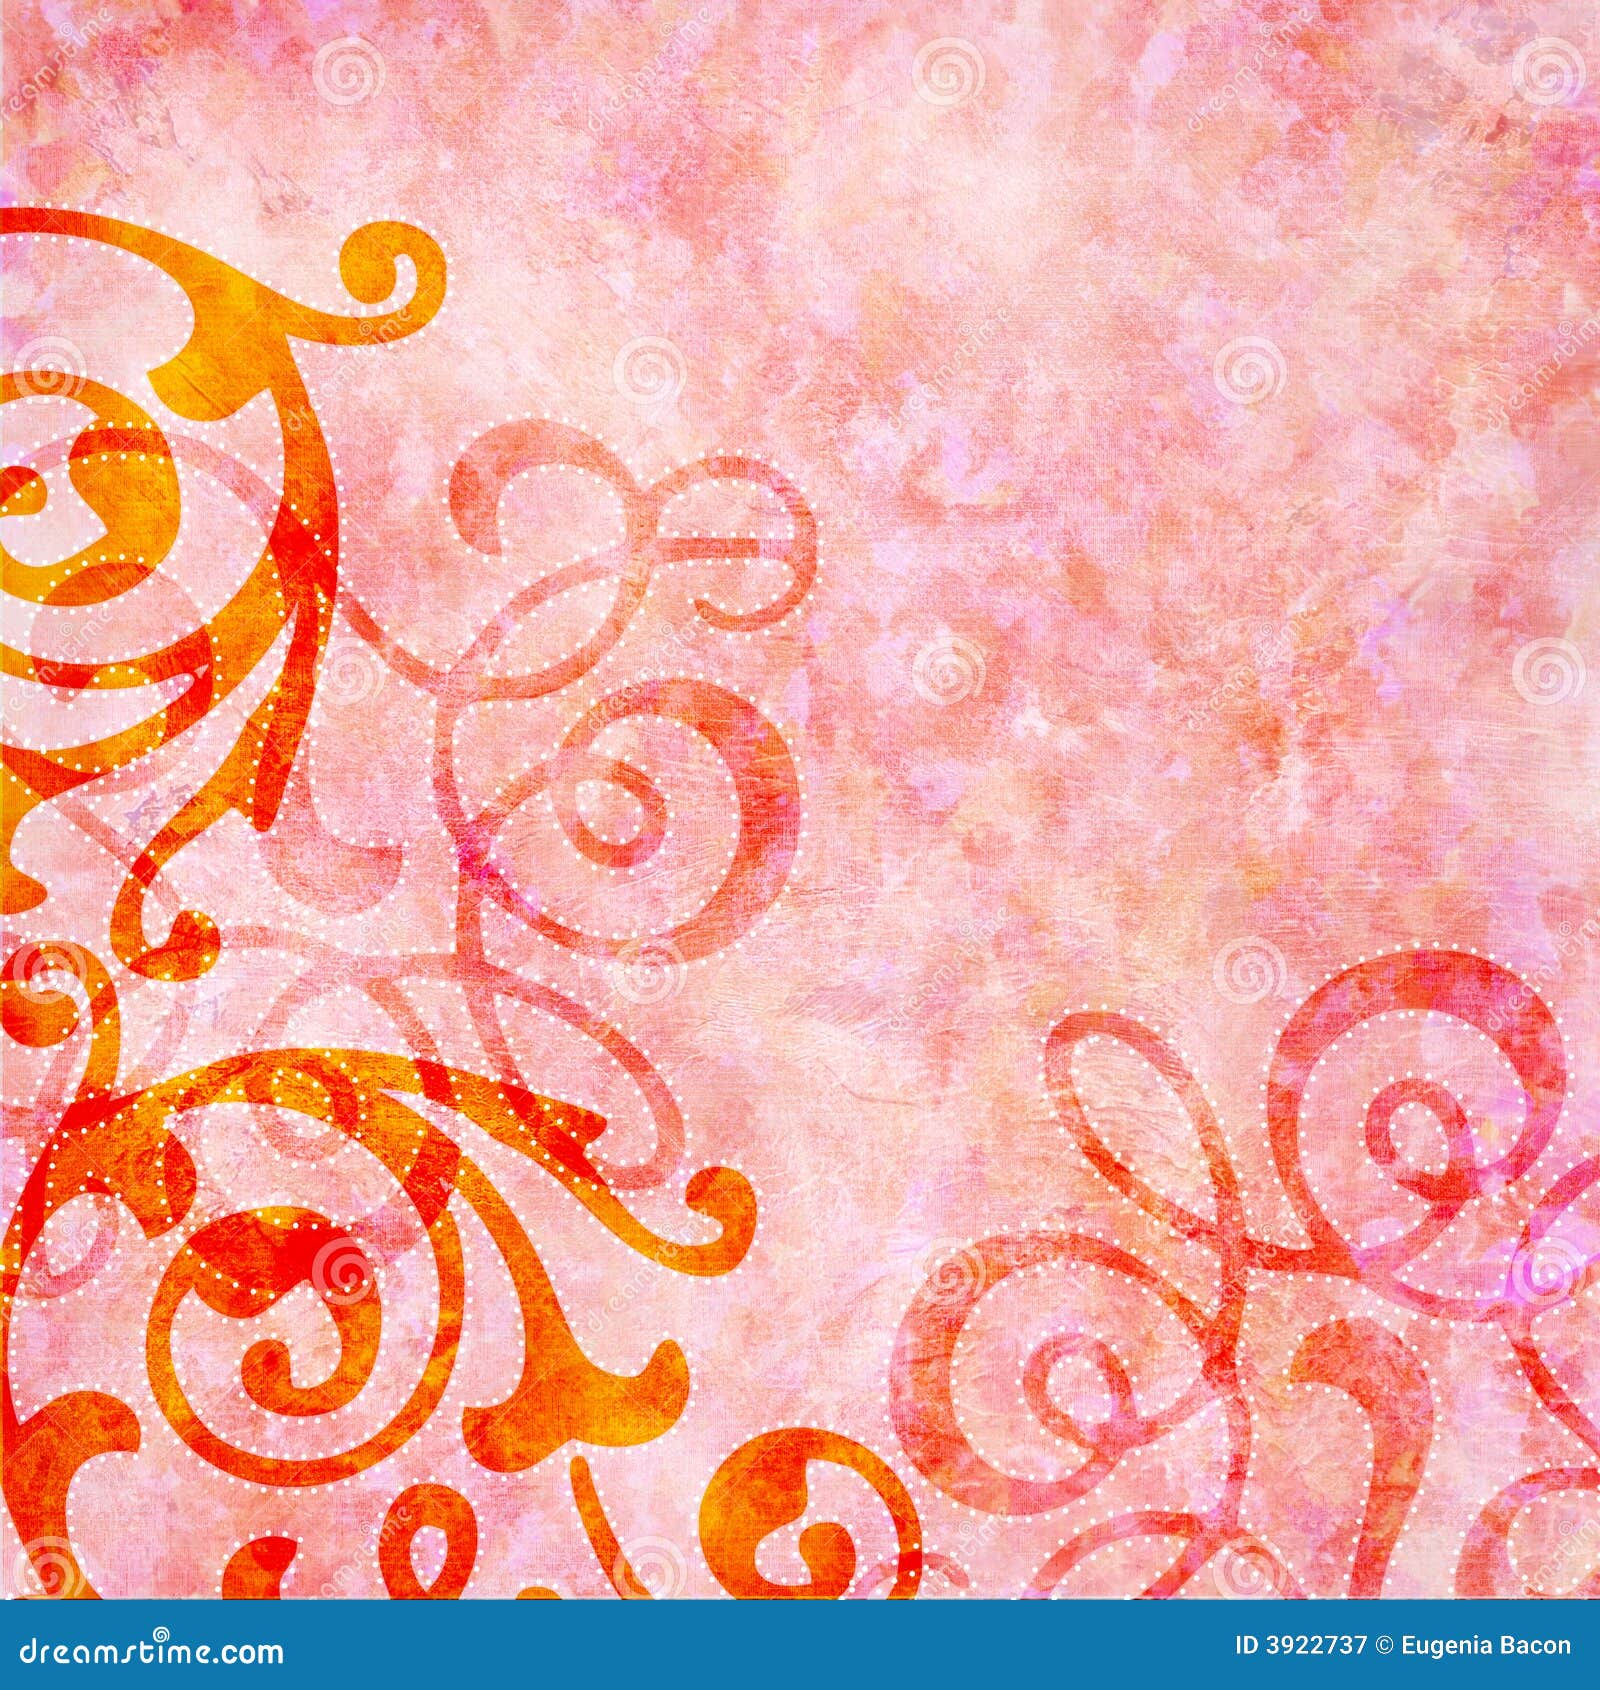 rosy pink background with colorful swirls